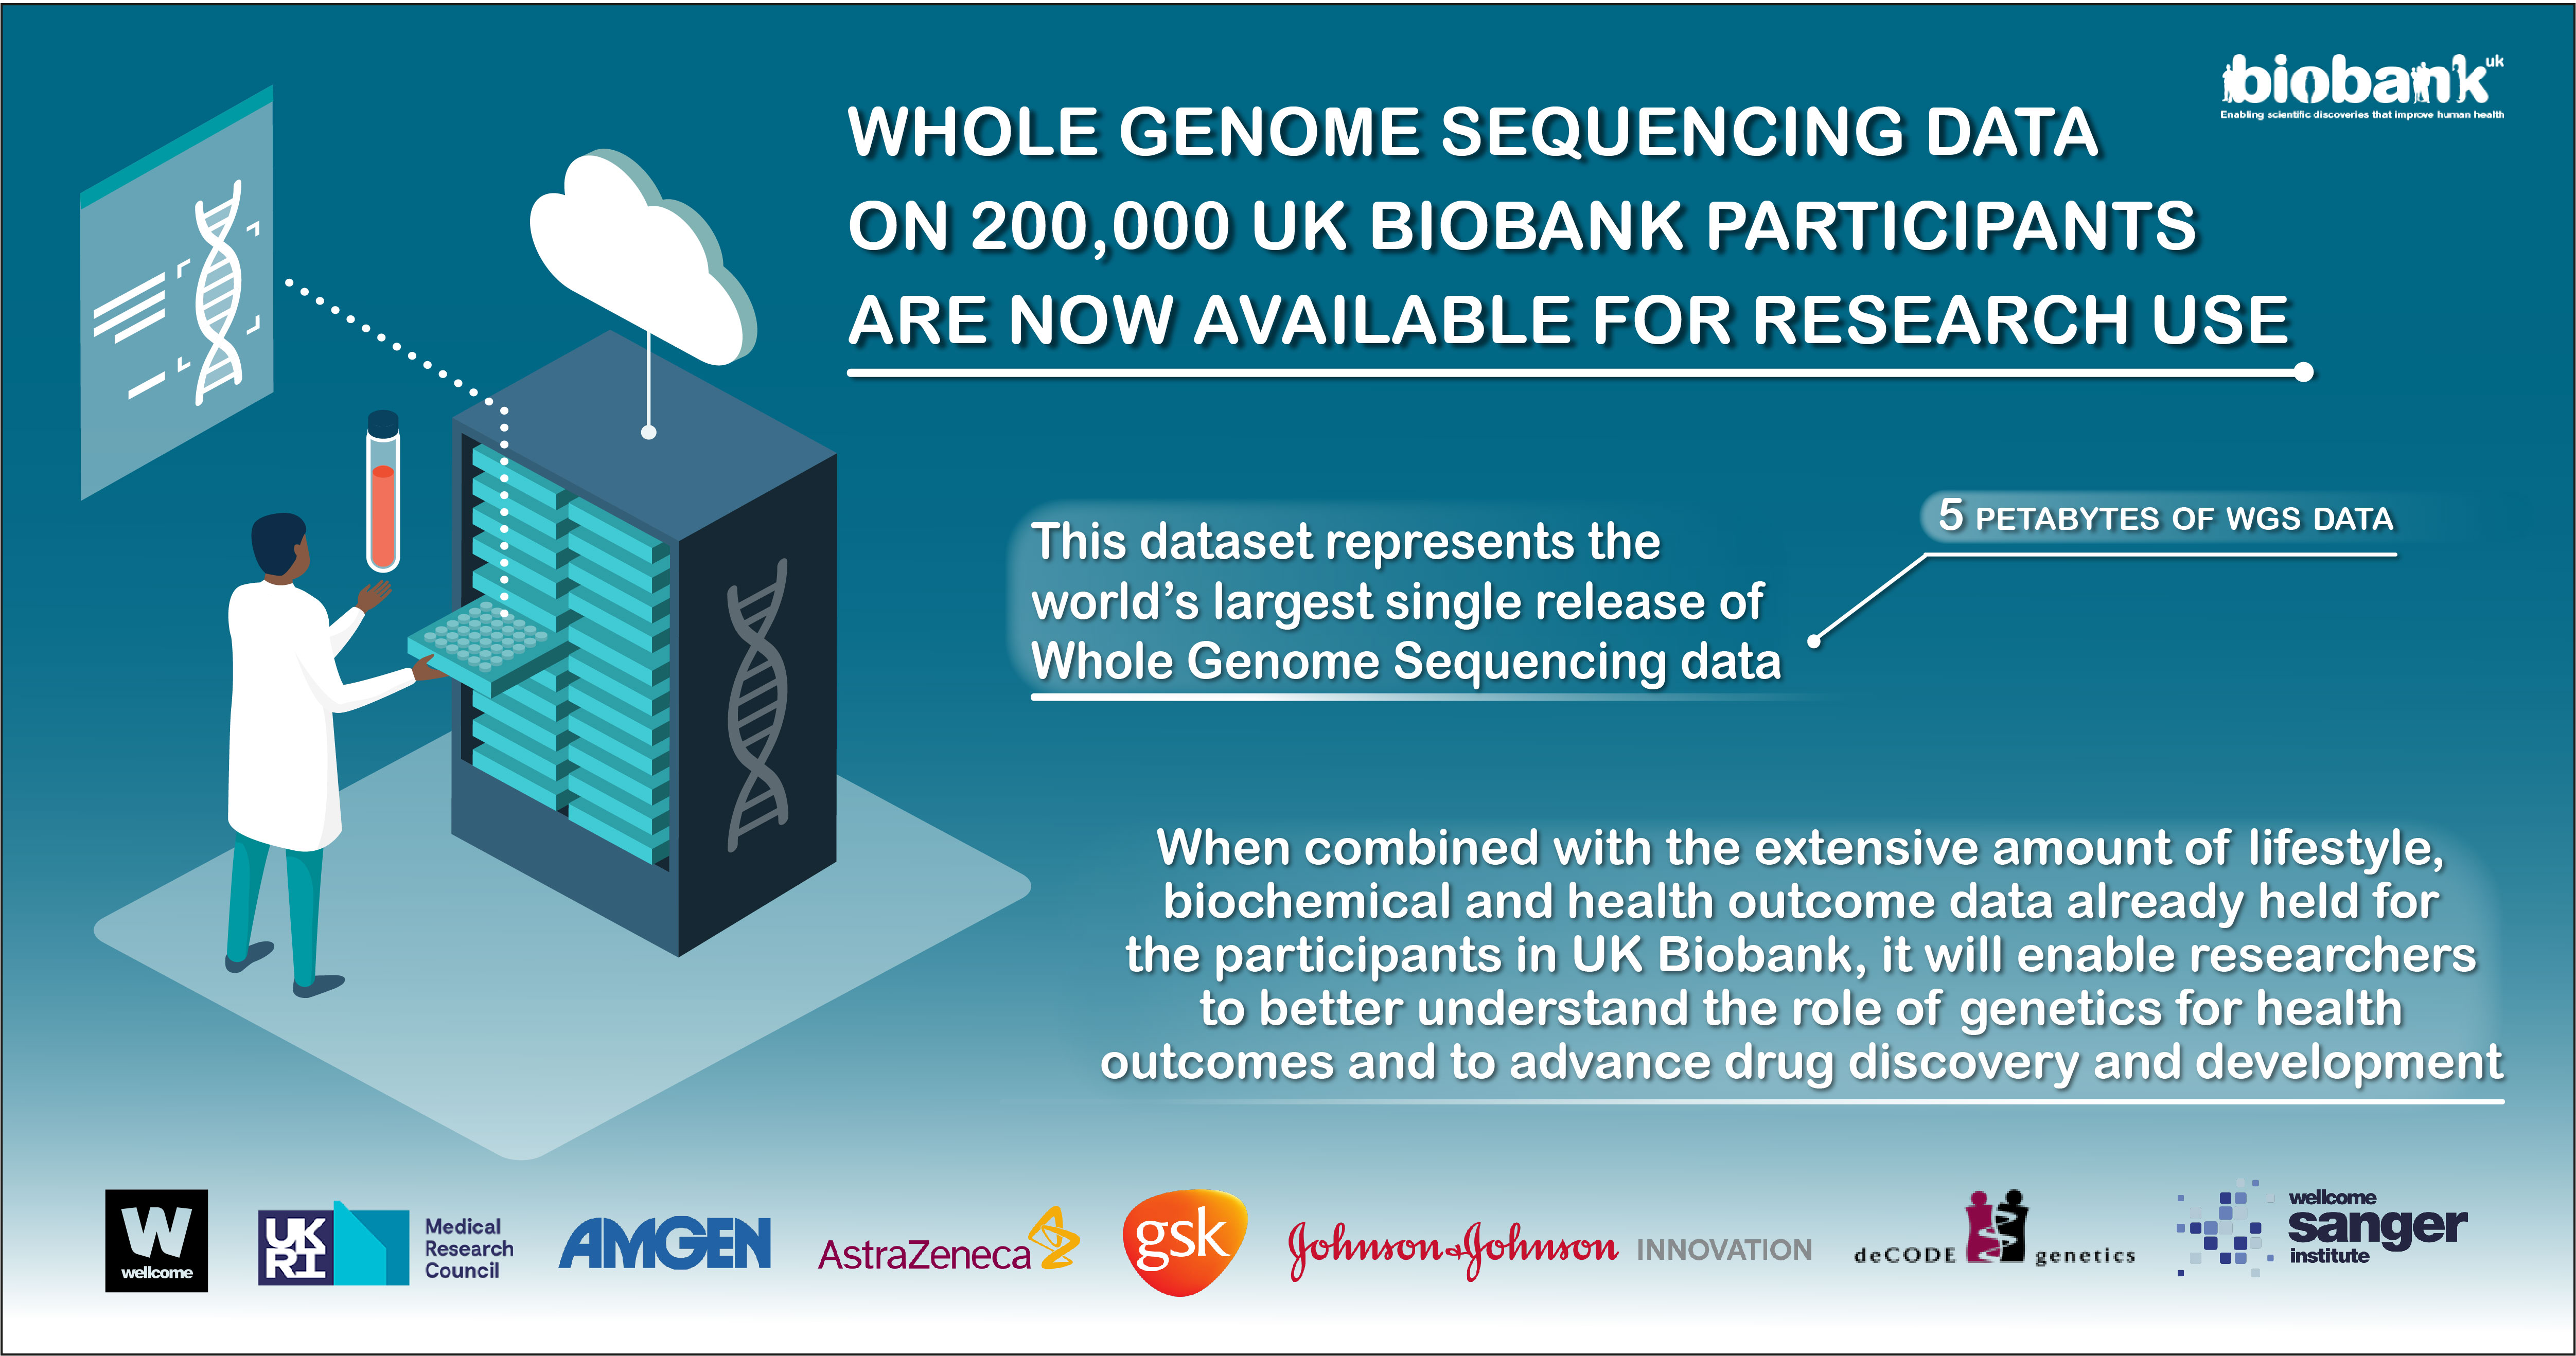 Whole Genome Sequencing data on 200,000 UK Biobank participants